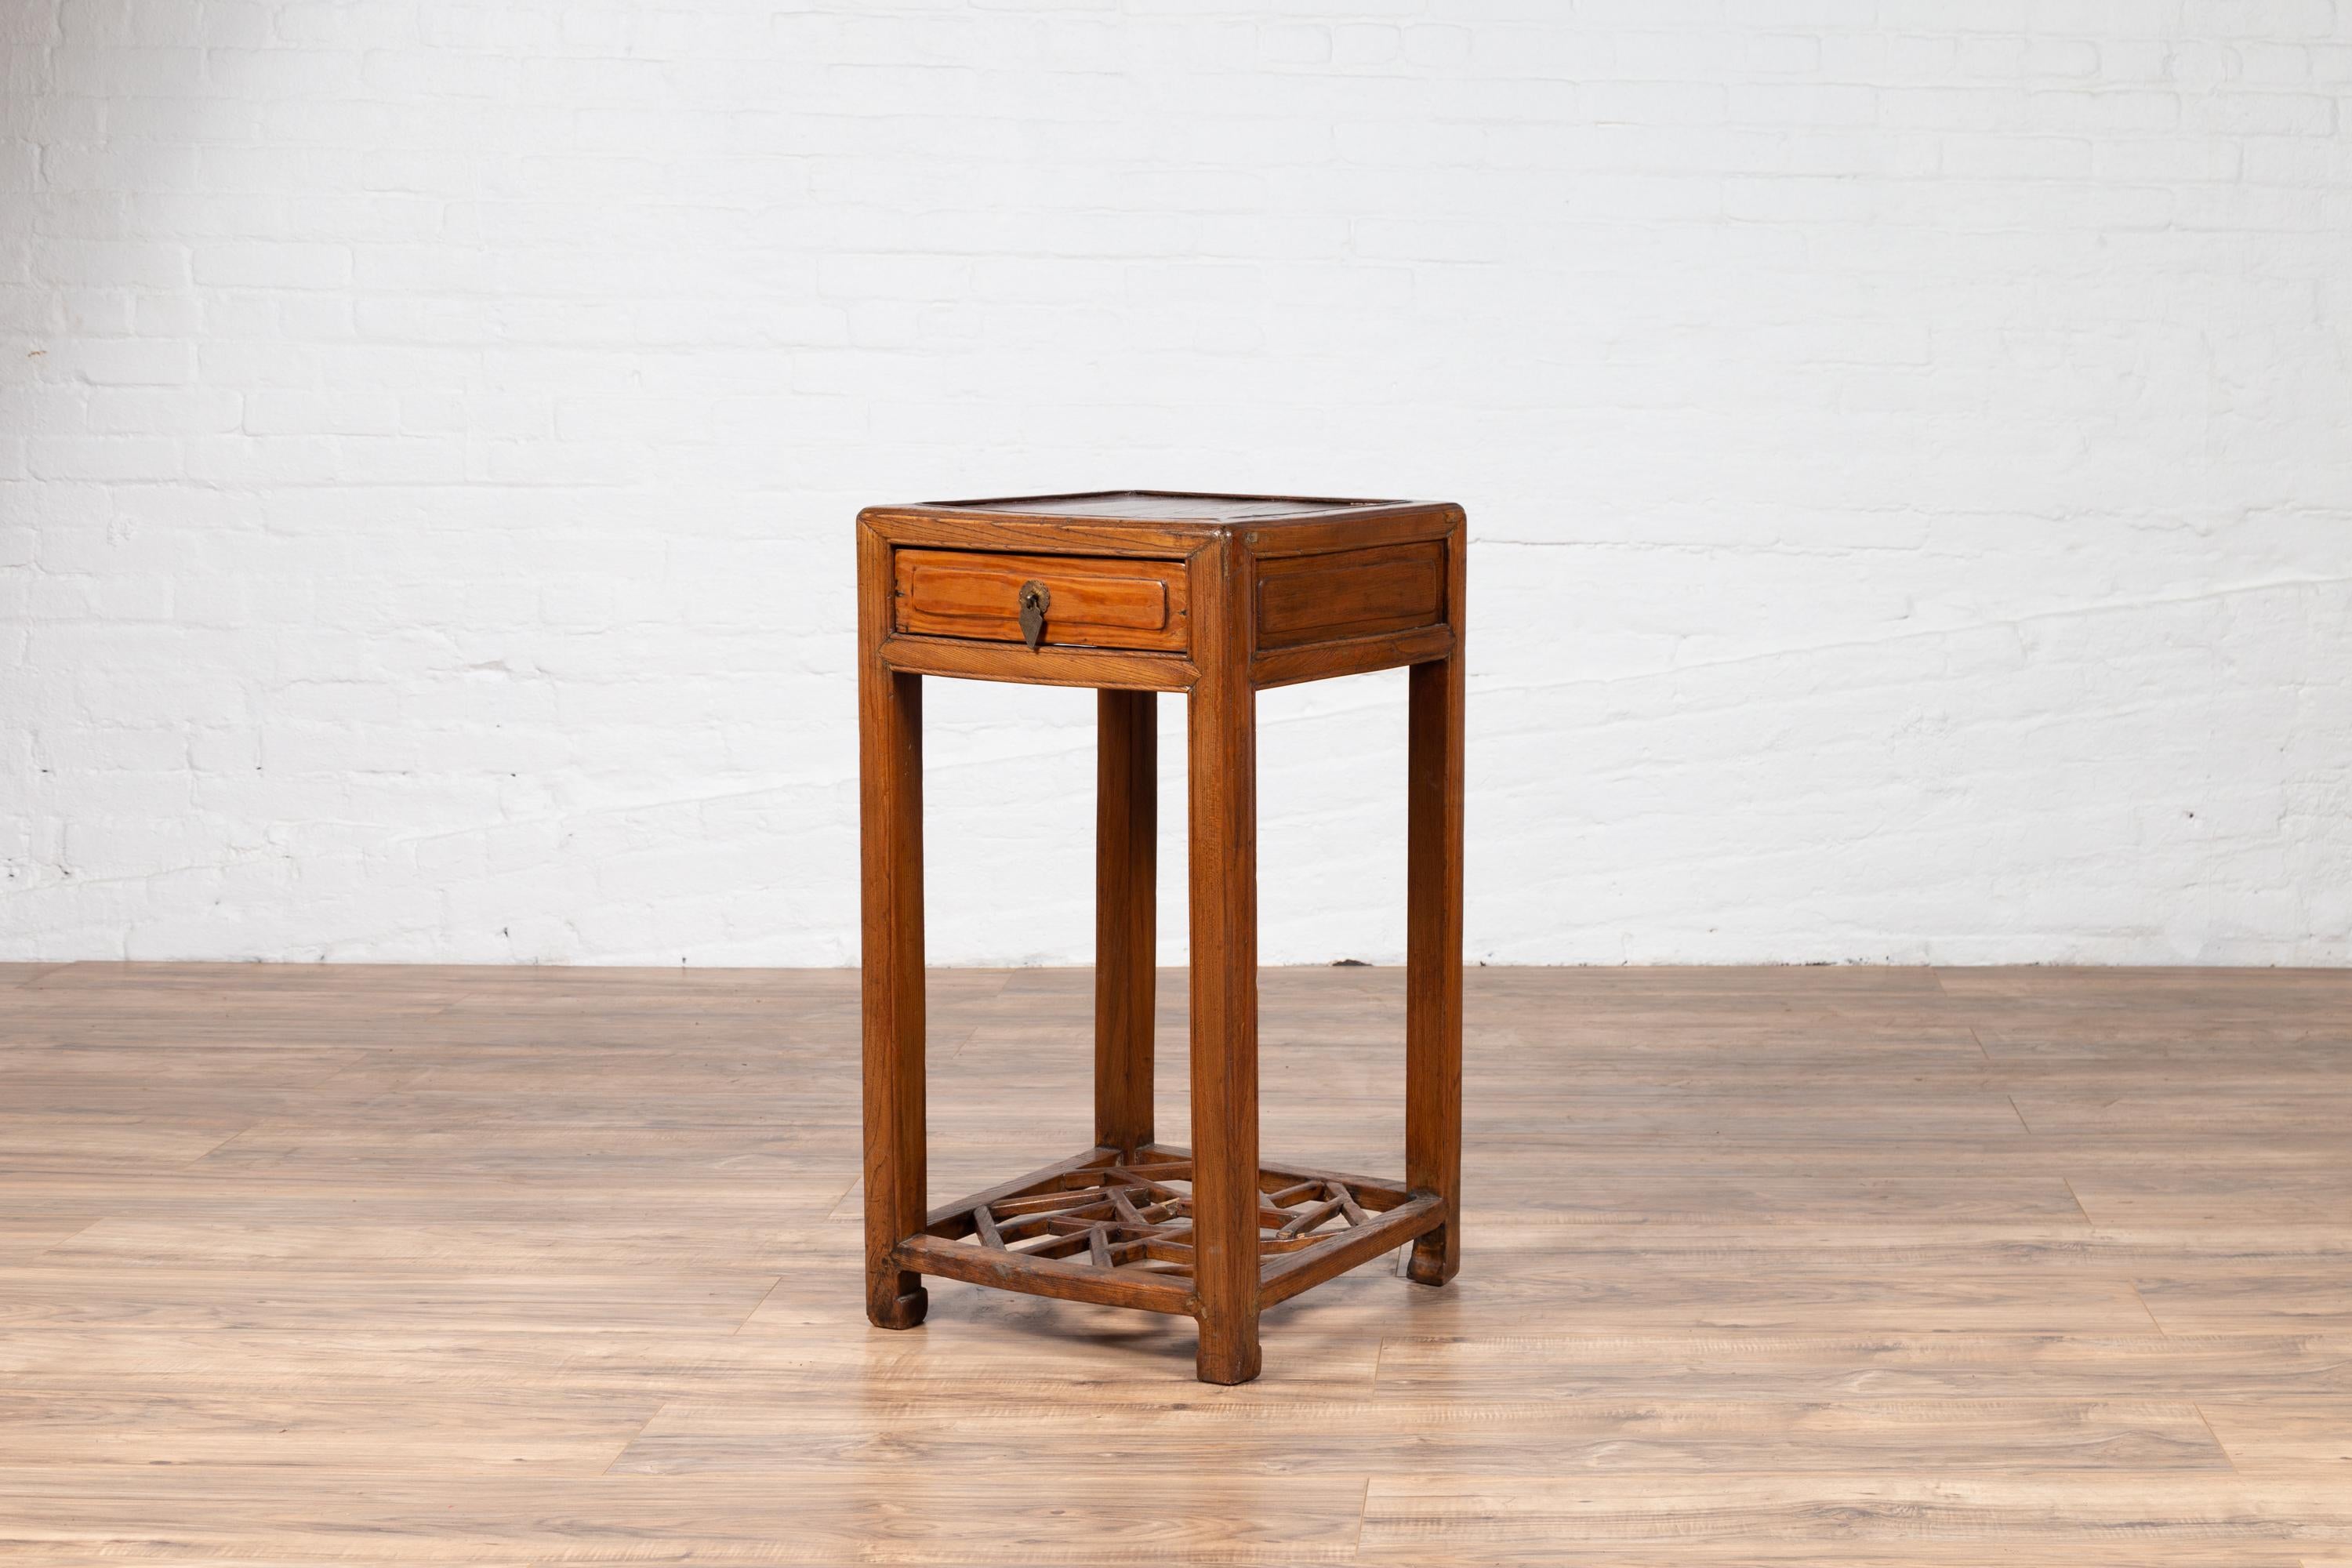 Chinese Vintage Elmwood Lamp Table with Single Drawer and Cracked Ice Shelf For Sale 5